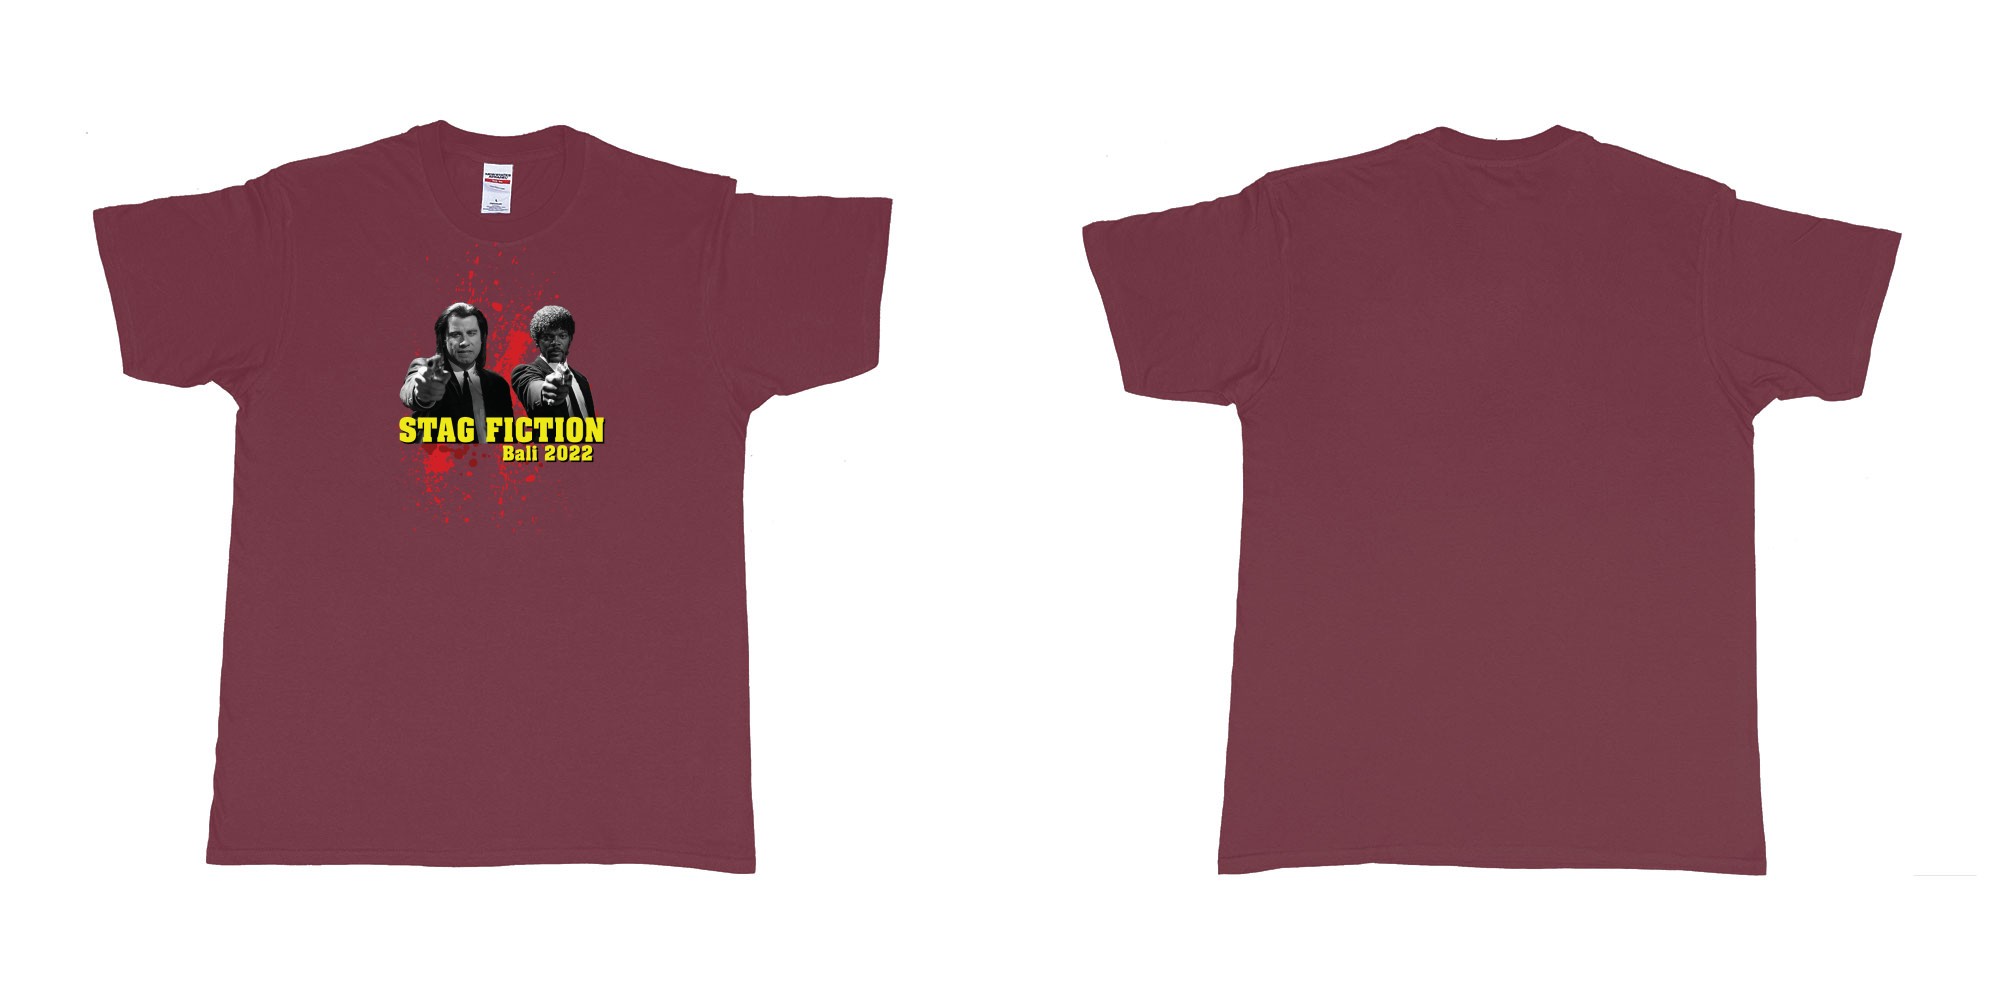 Custom tshirt design pulp fiction blood in fabric color marron choice your own text made in Bali by The Pirate Way